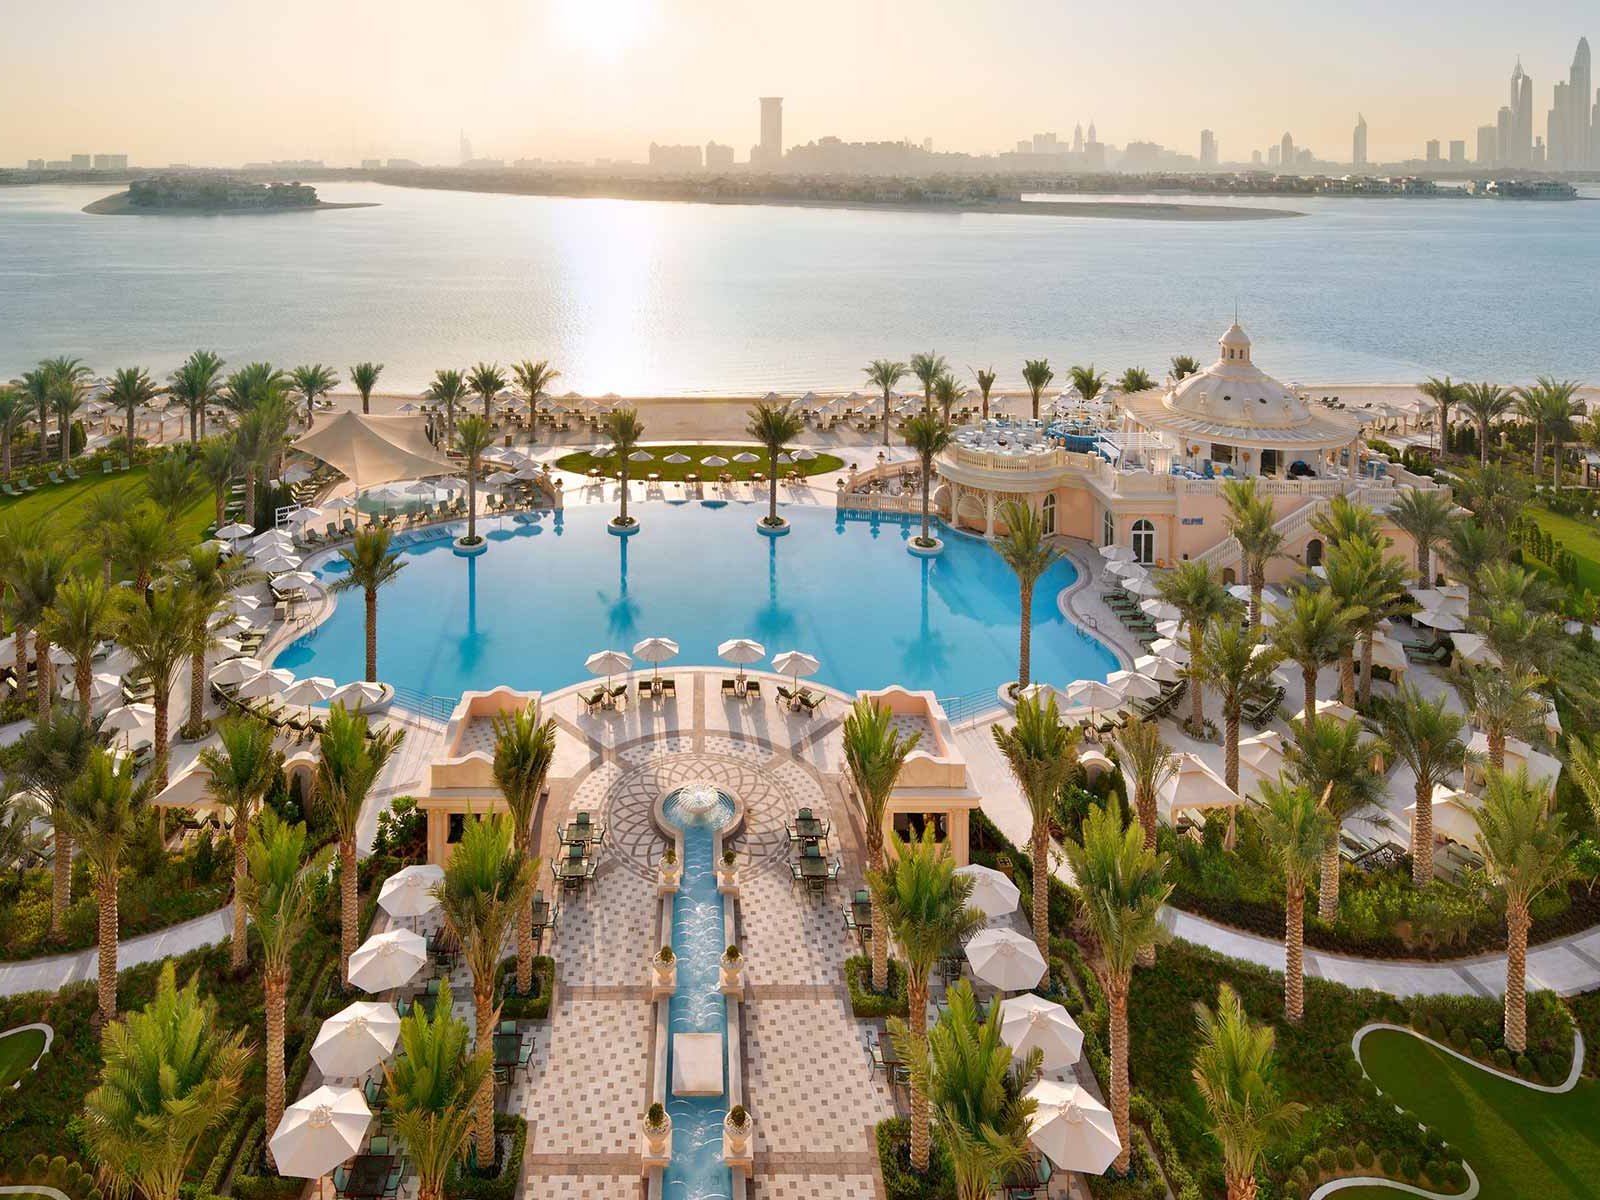 Raffles the Palm Dubai will extend across 100,000 square metres on the West Crescent of the Palm Jumeirah.